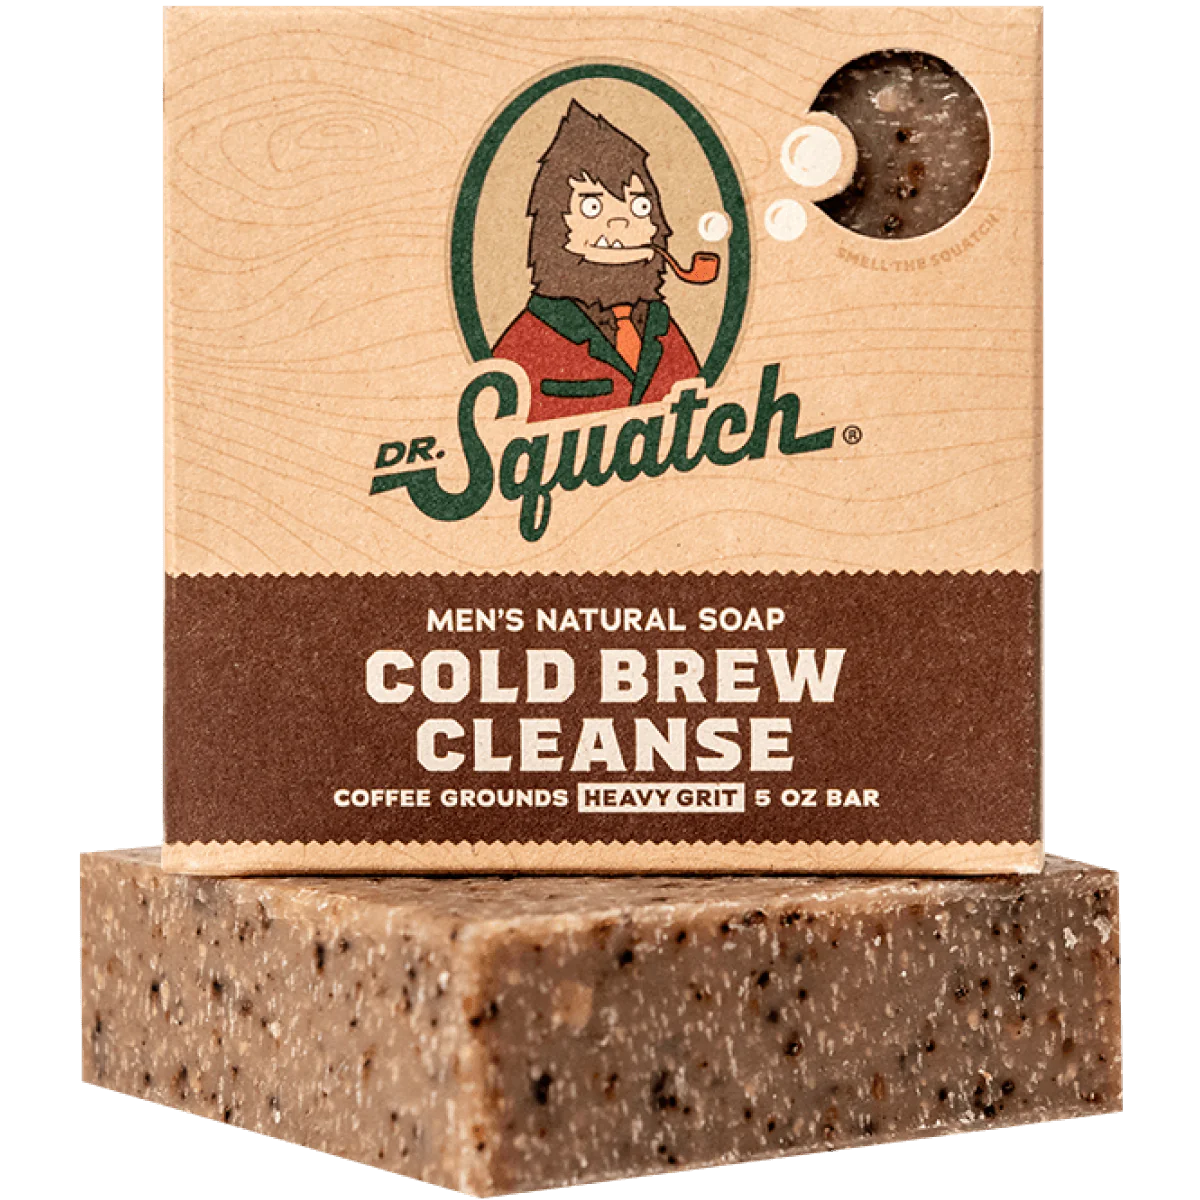 Men's Natural Soap - Cold Brew Cleanse